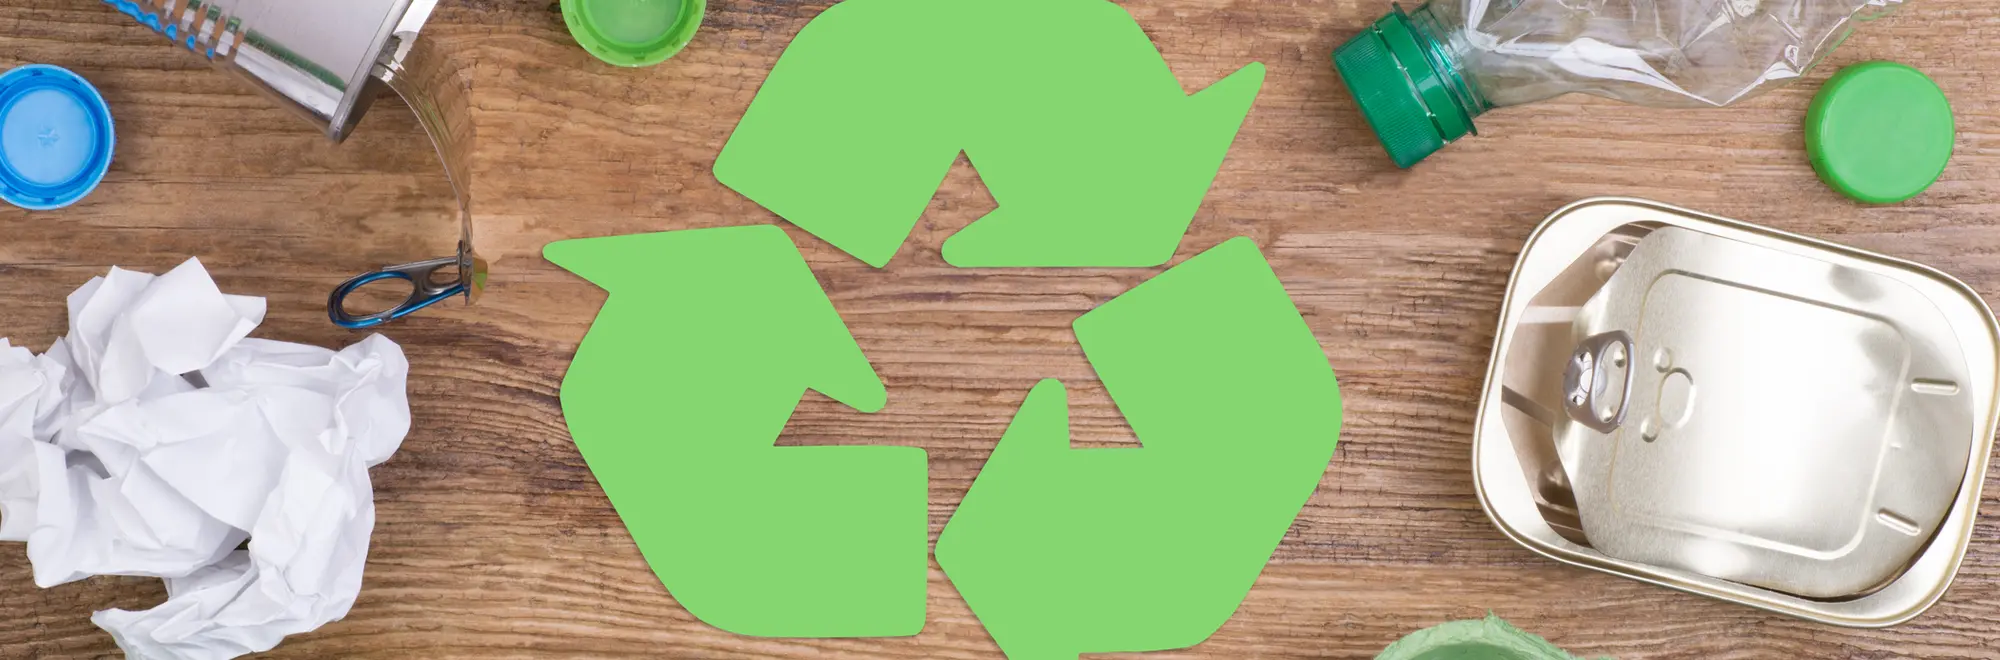 How to recycle at home and with the family